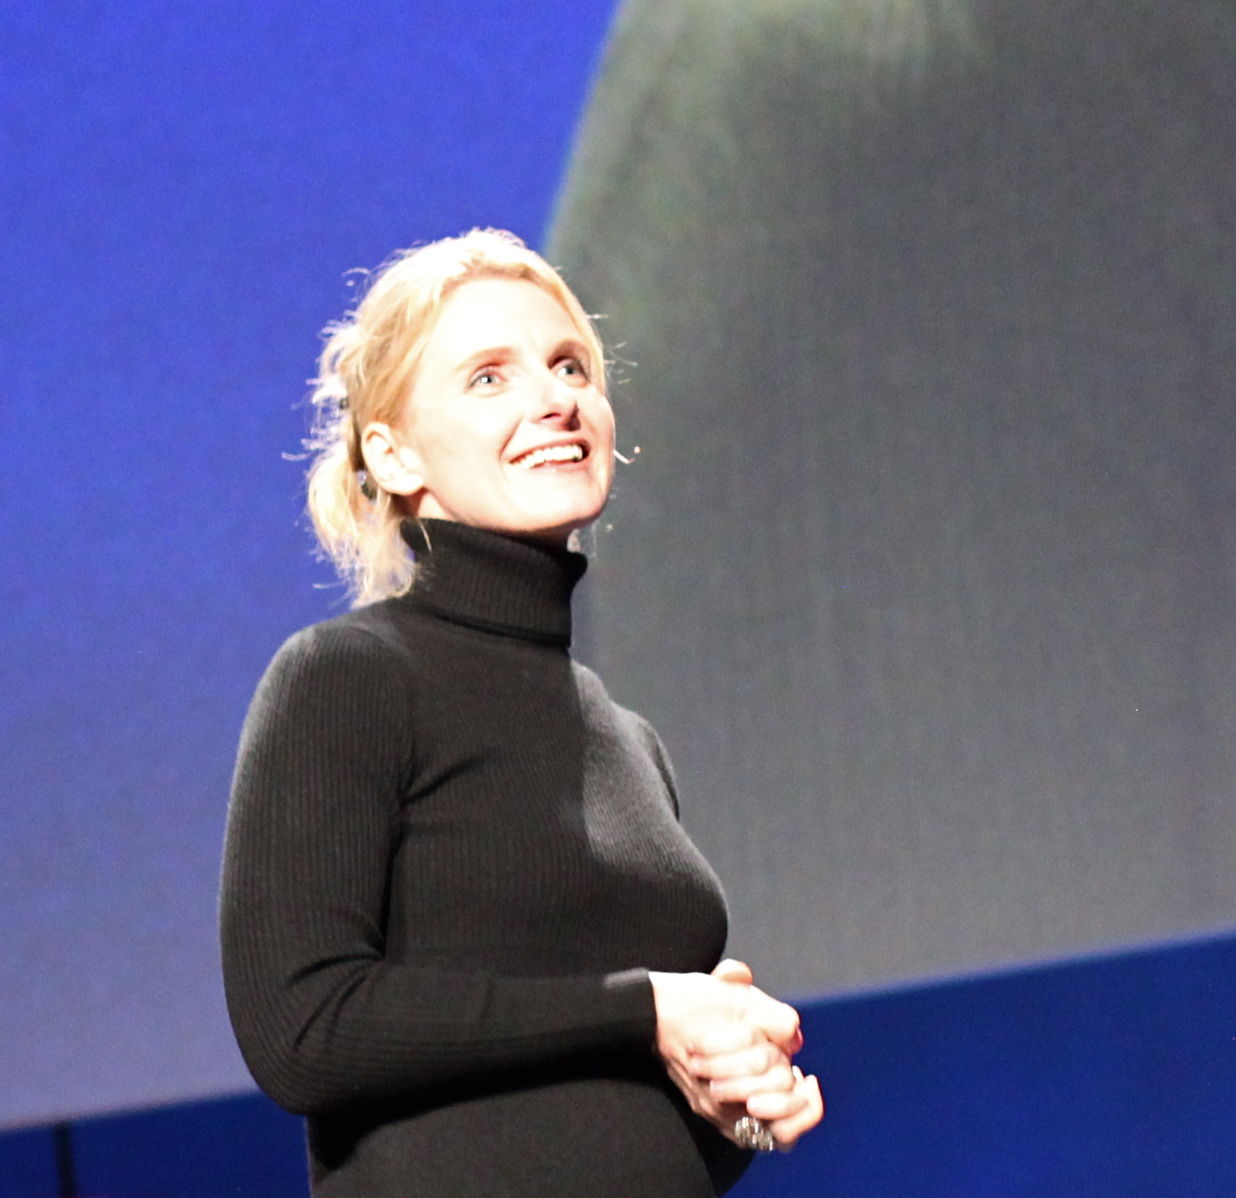 Elizabeth_Gilbert,_author_of_'Eat_Pray_Love',_at_TED,_on_'Amusing_Muses'